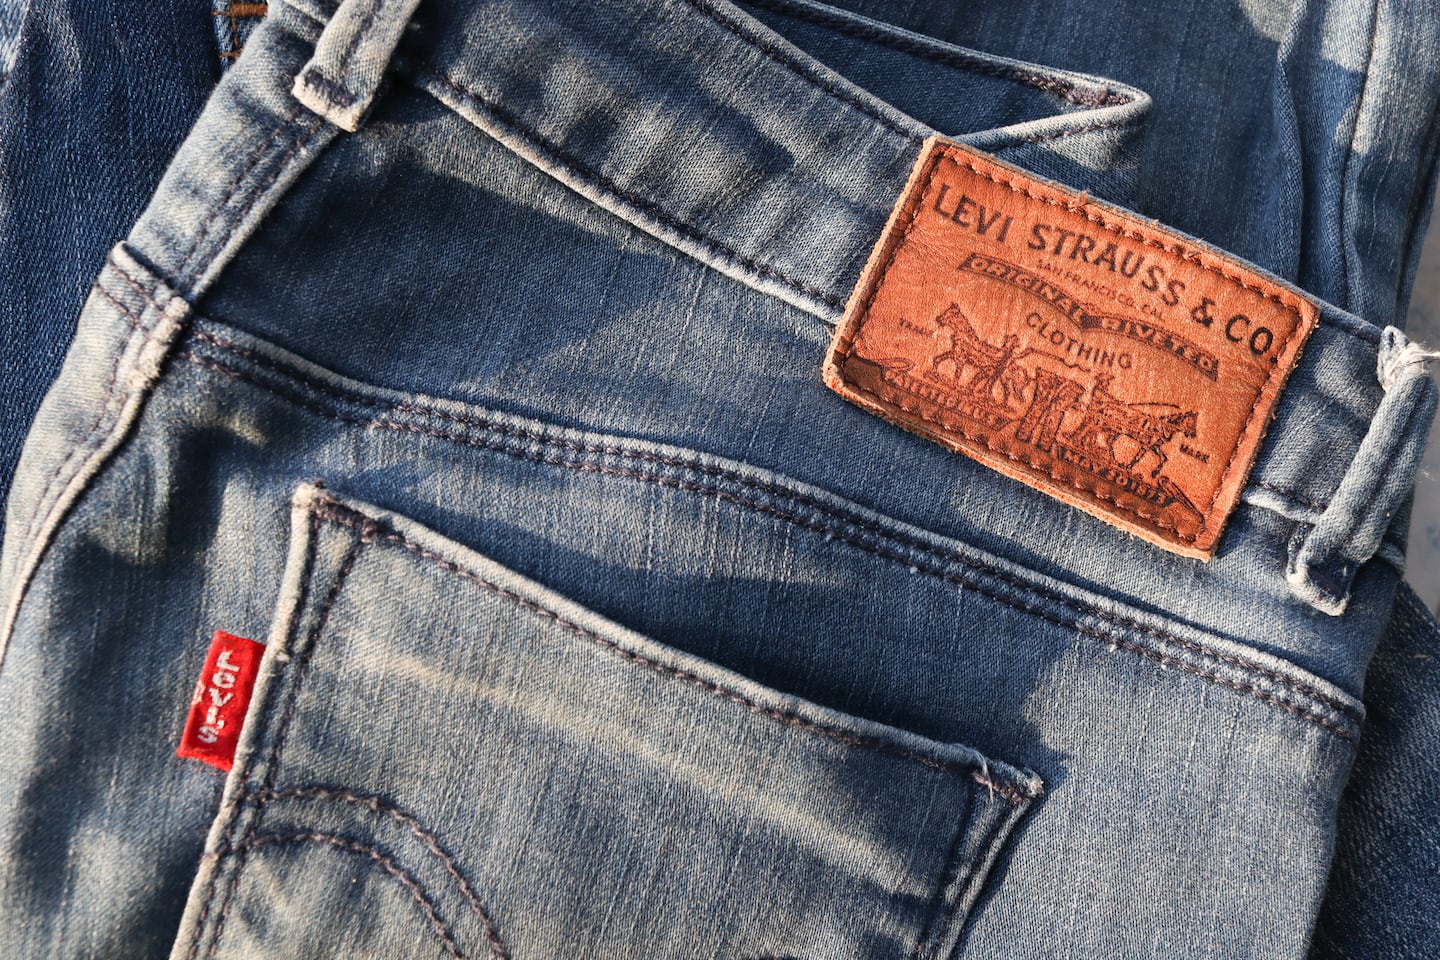 Levi Strauss & Co. enters the activewear market.